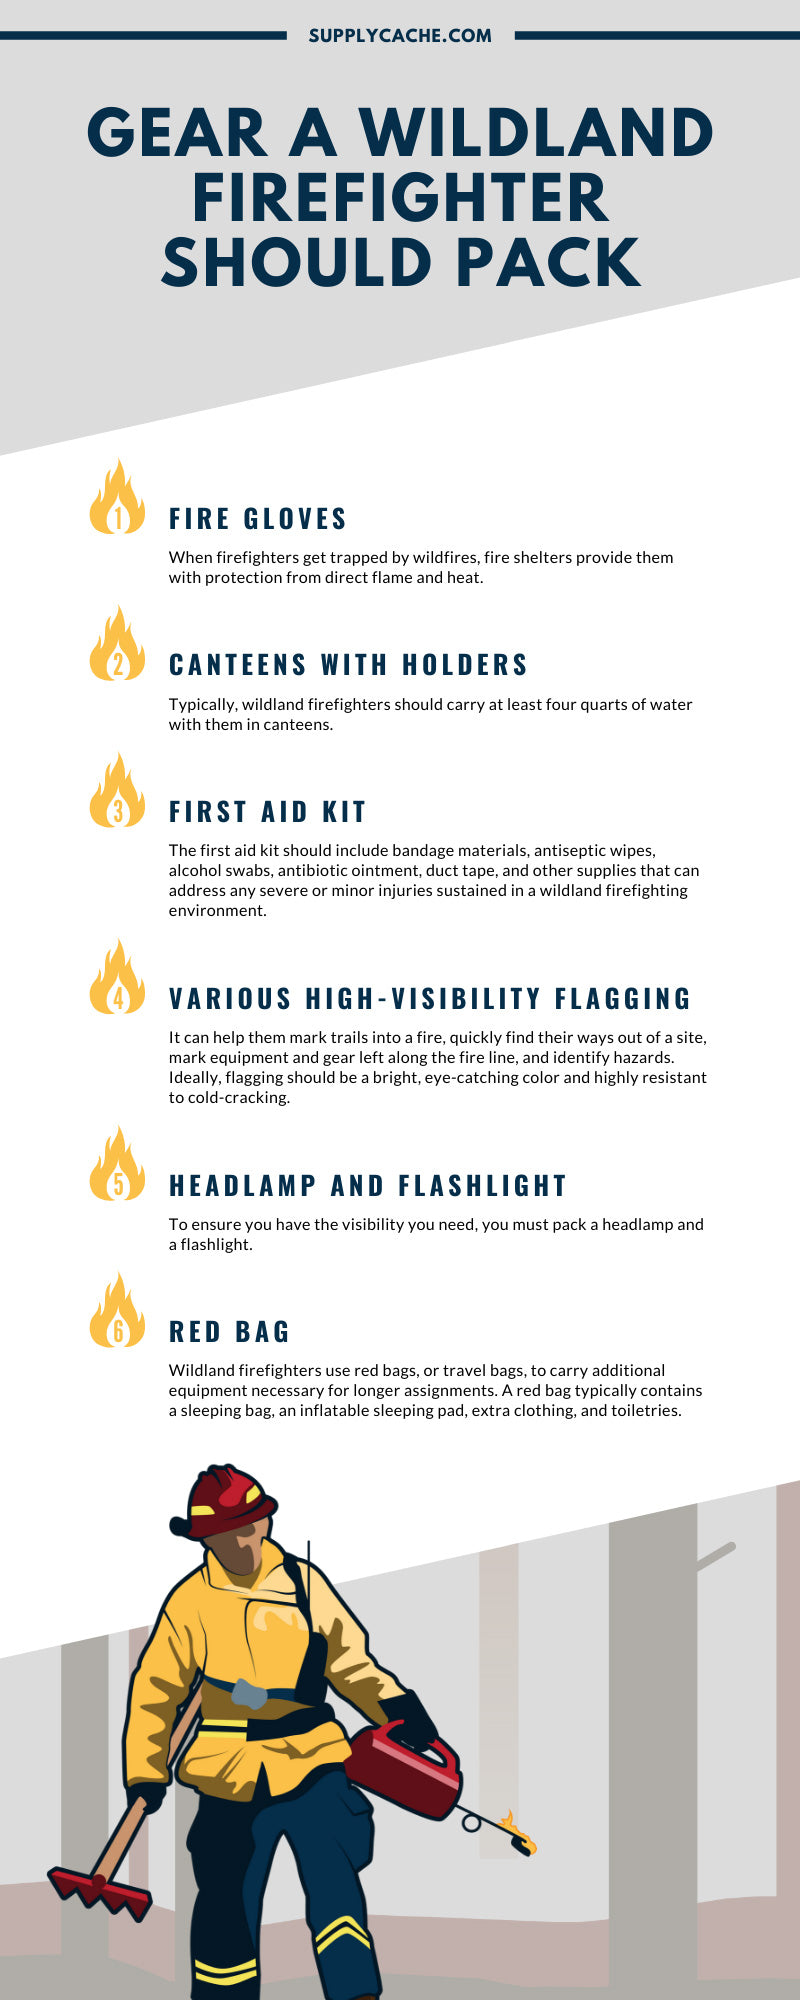 Burn Bags USA - Burn Bags are made using decommissioned fire hose